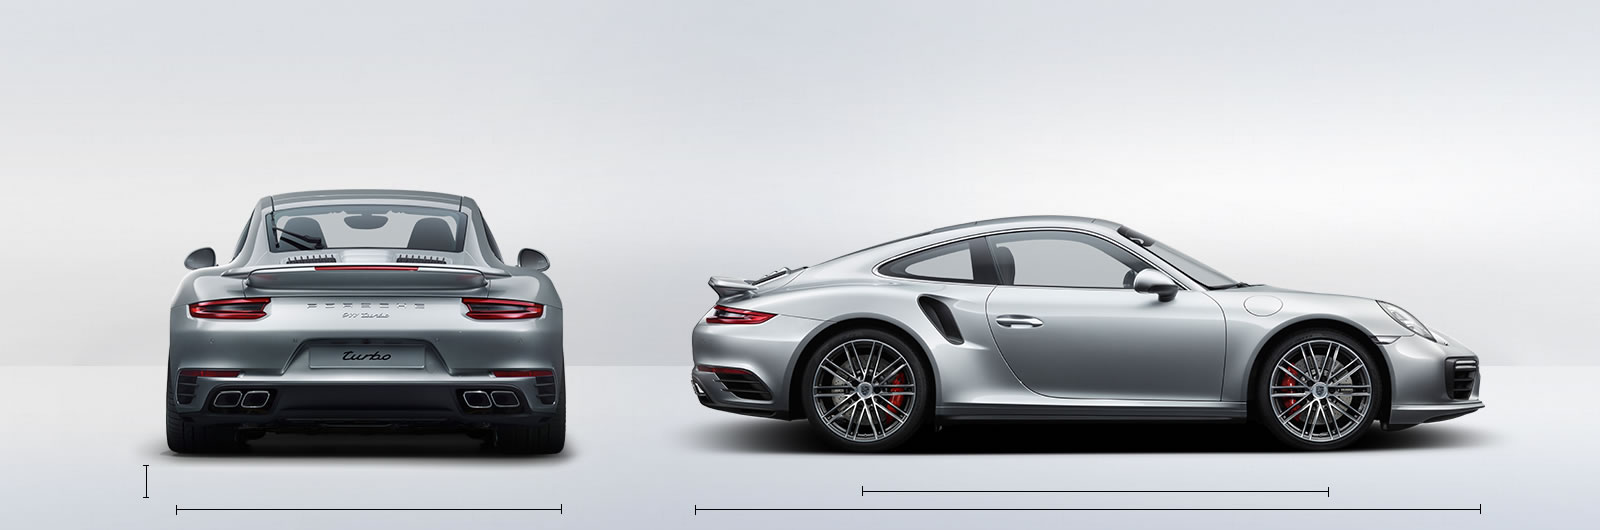 911 Turbo Specifications